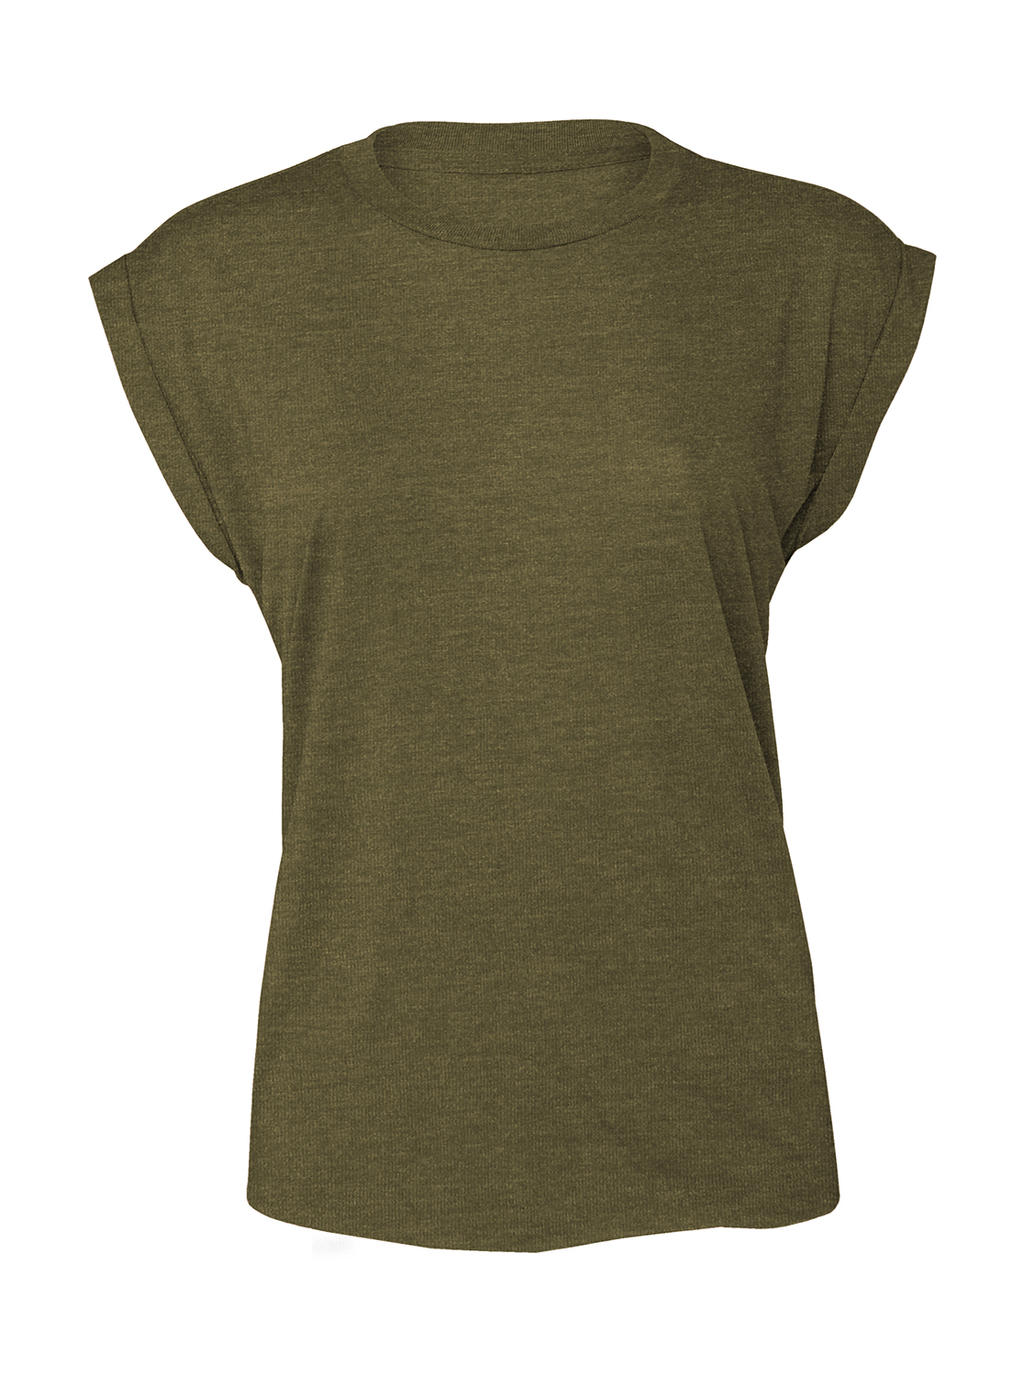  Womens Flowy Muscle Tee Rolled Cuff in Farbe Heather Olive